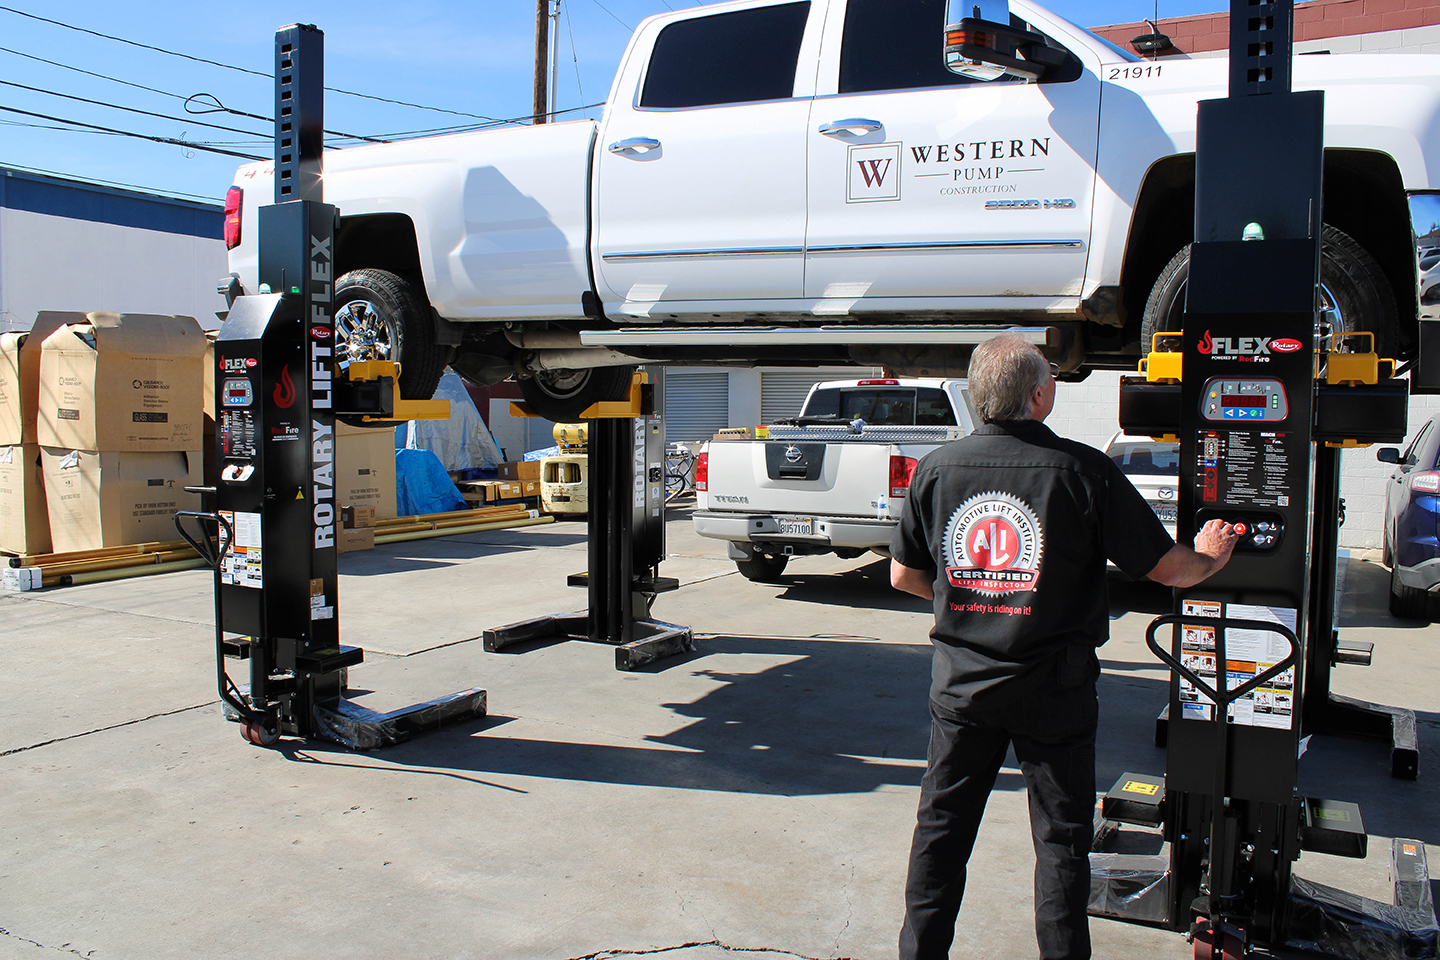 Rotary in-ground lift being serviced by a certified automotive technician